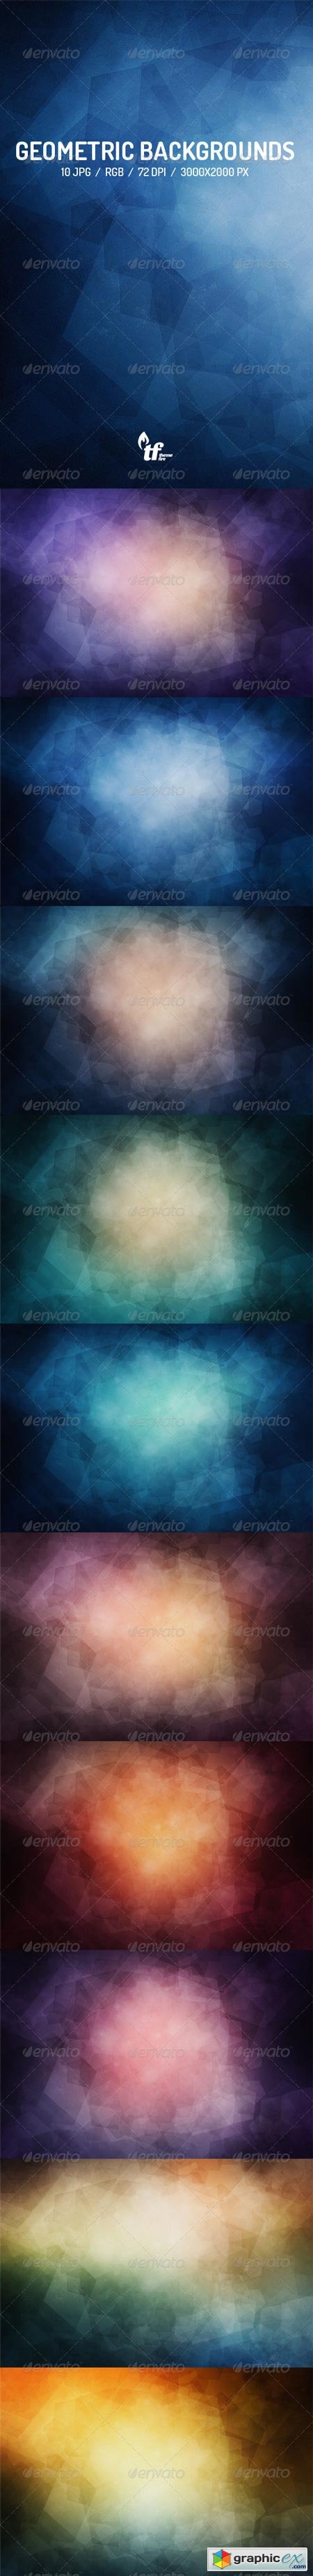 10 Abstract Geometric Backgrounds 7848017